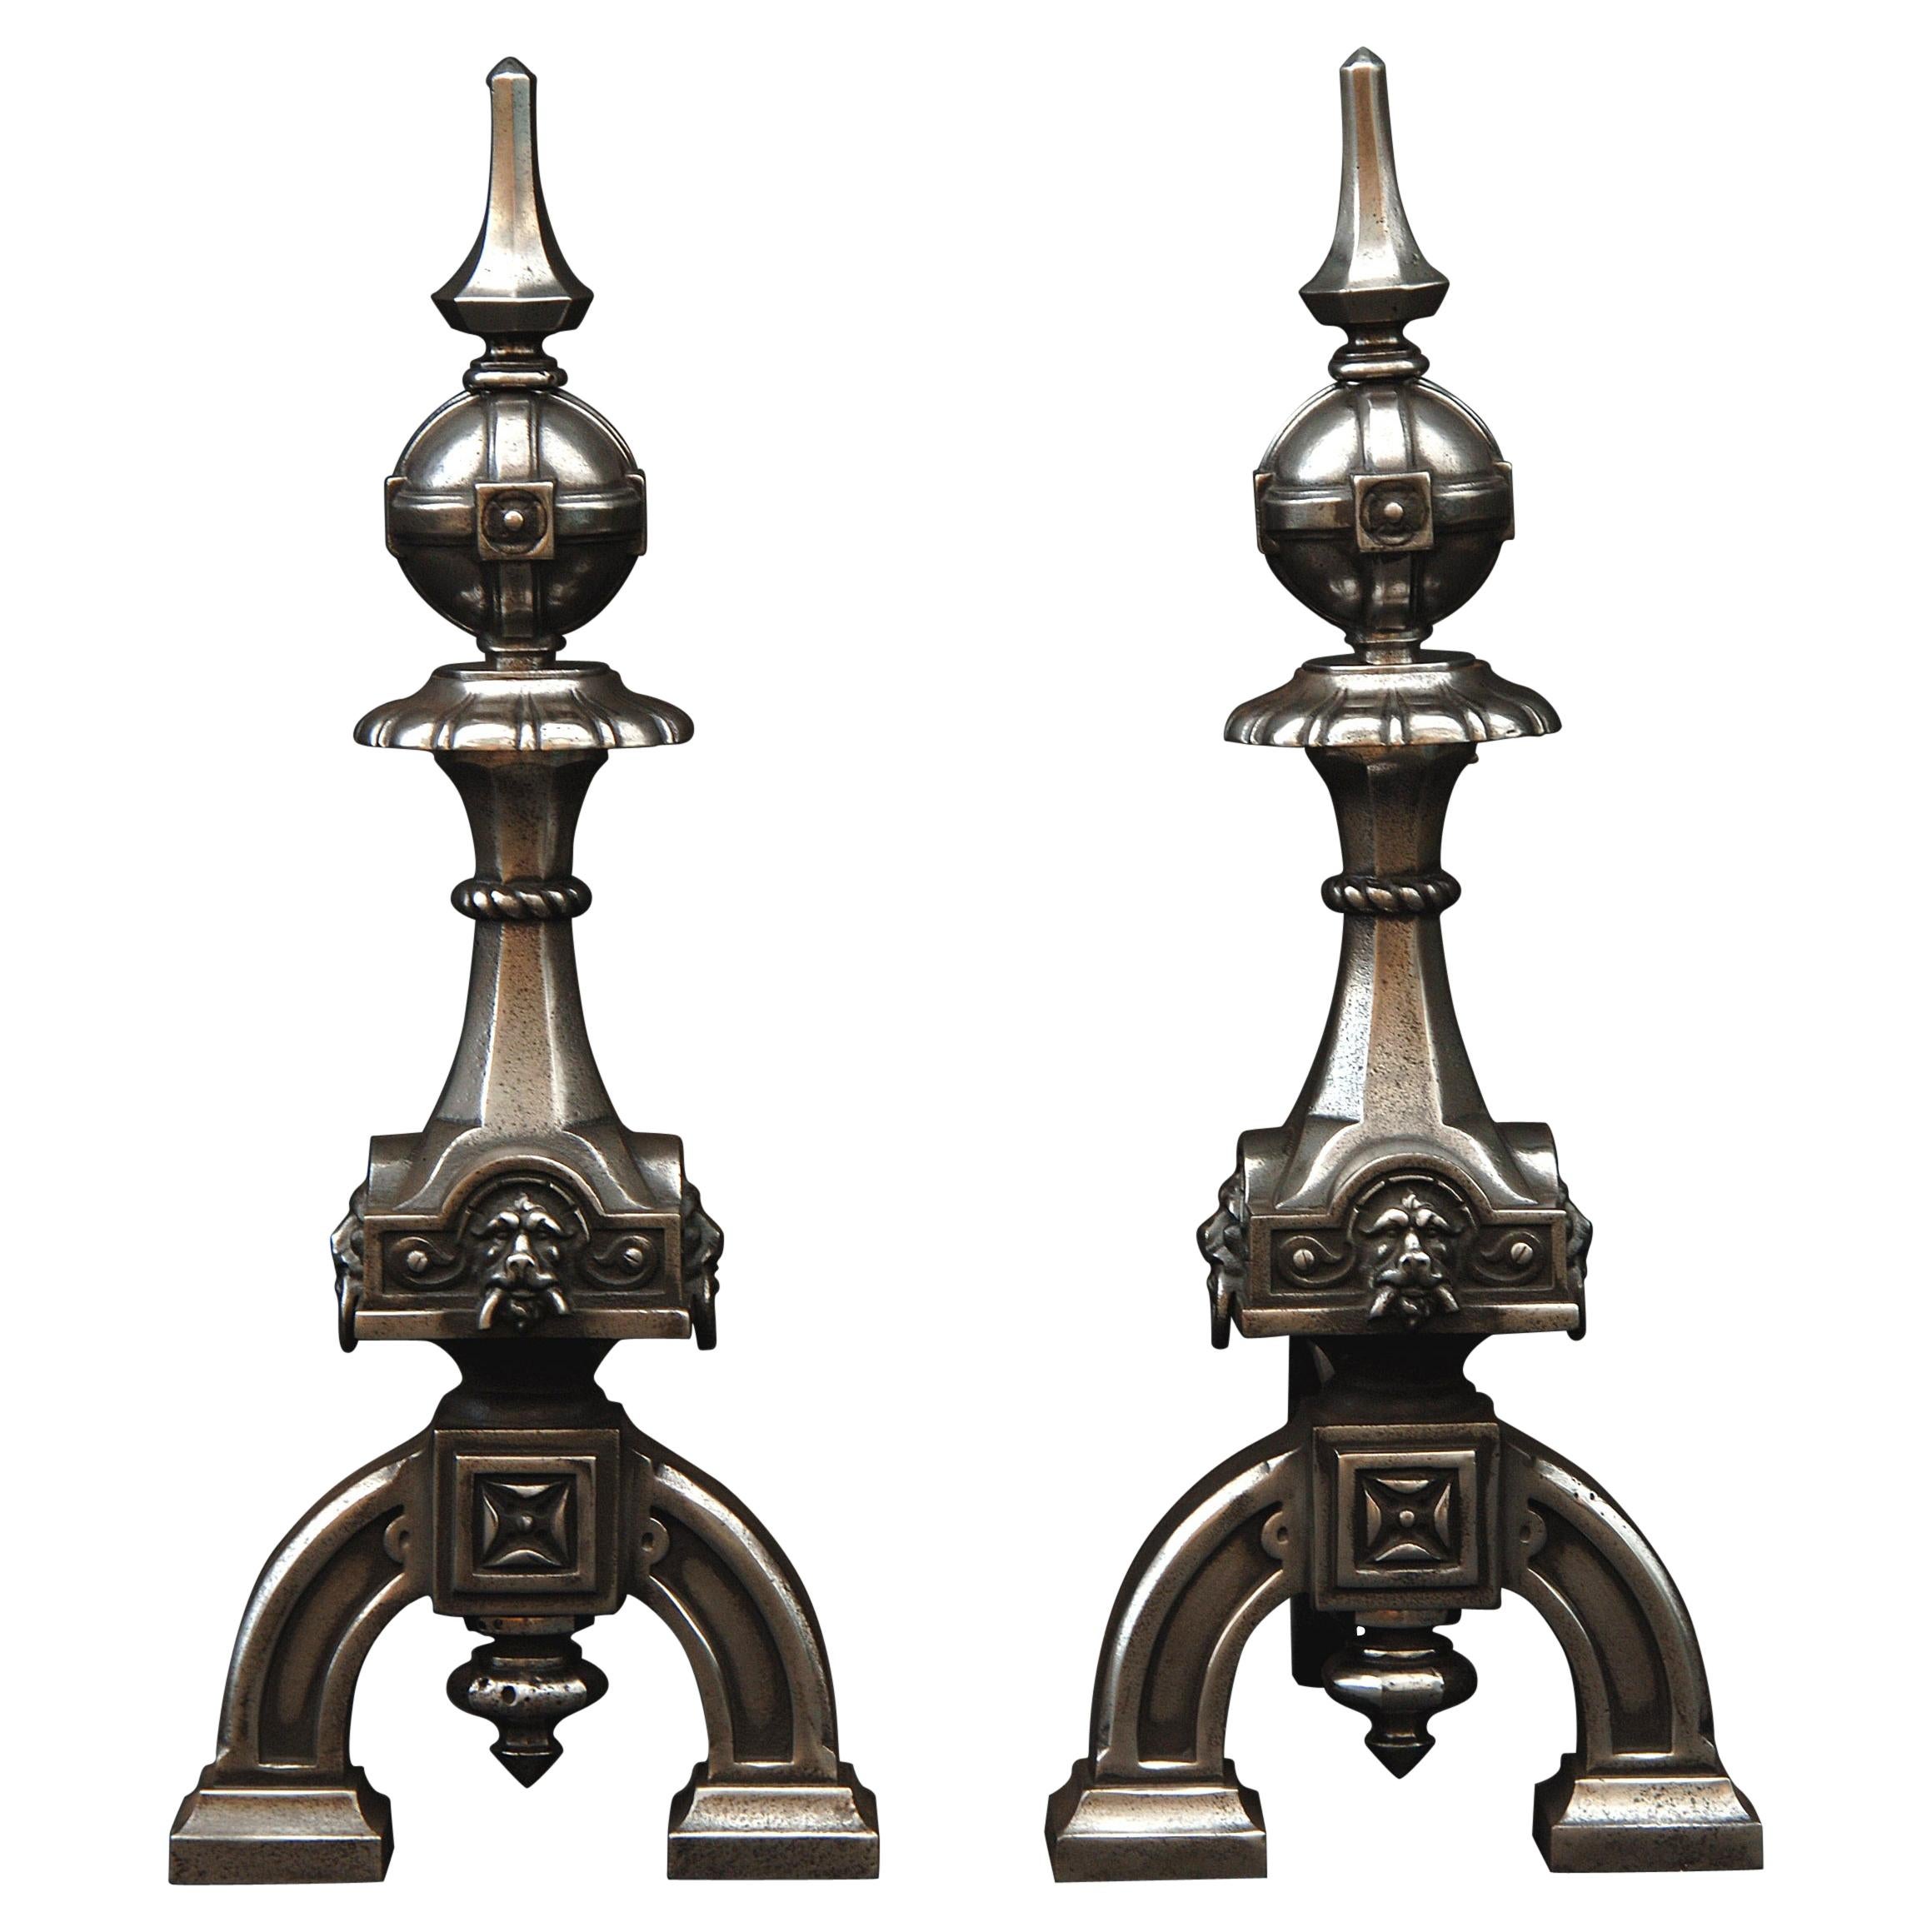 Pair of Neo Gothic Steel Firedogs